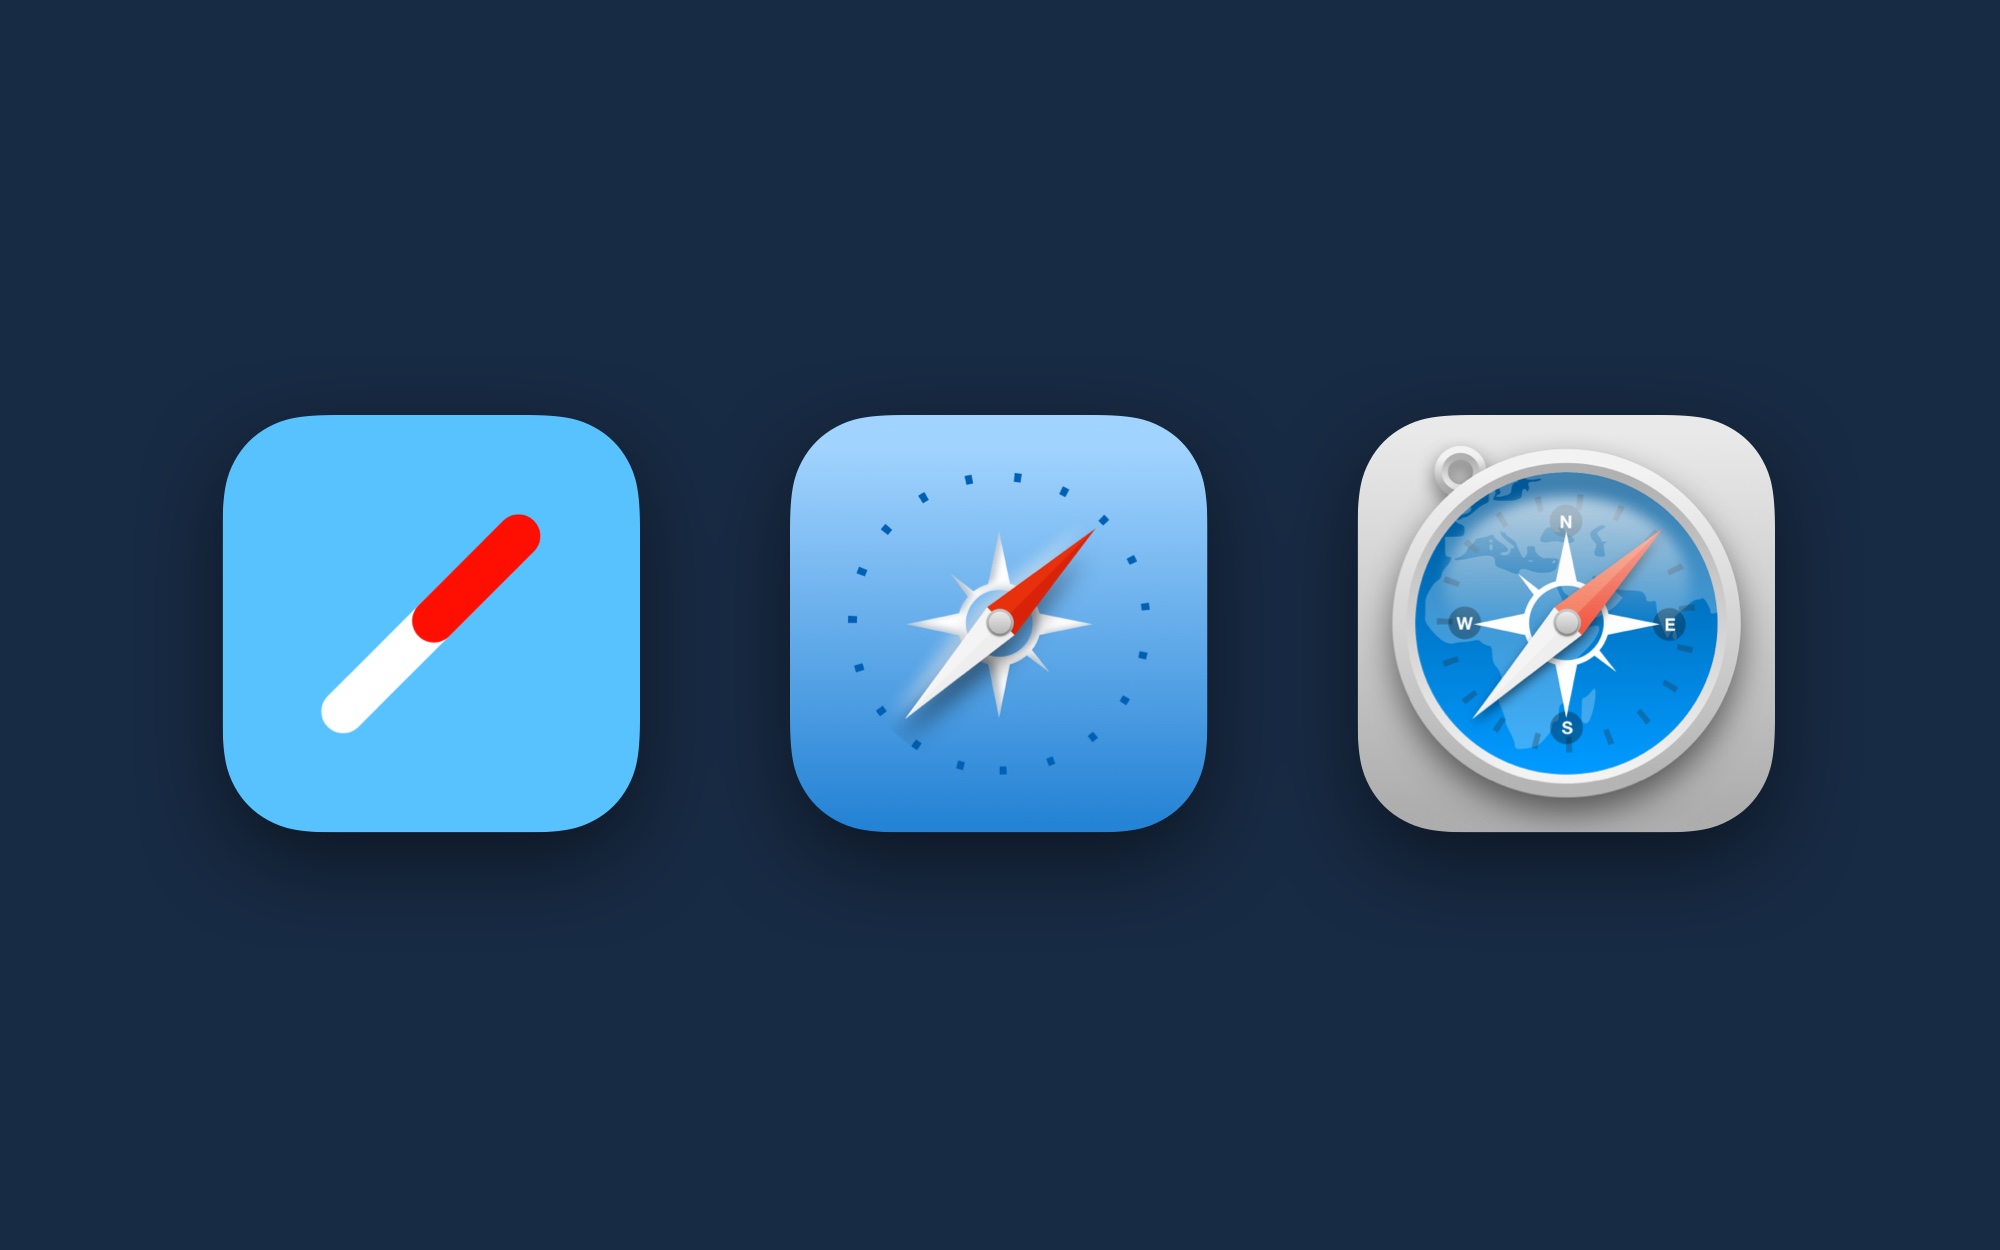 Comparison of the Safari app icon in abstract, gradient and textured themes.